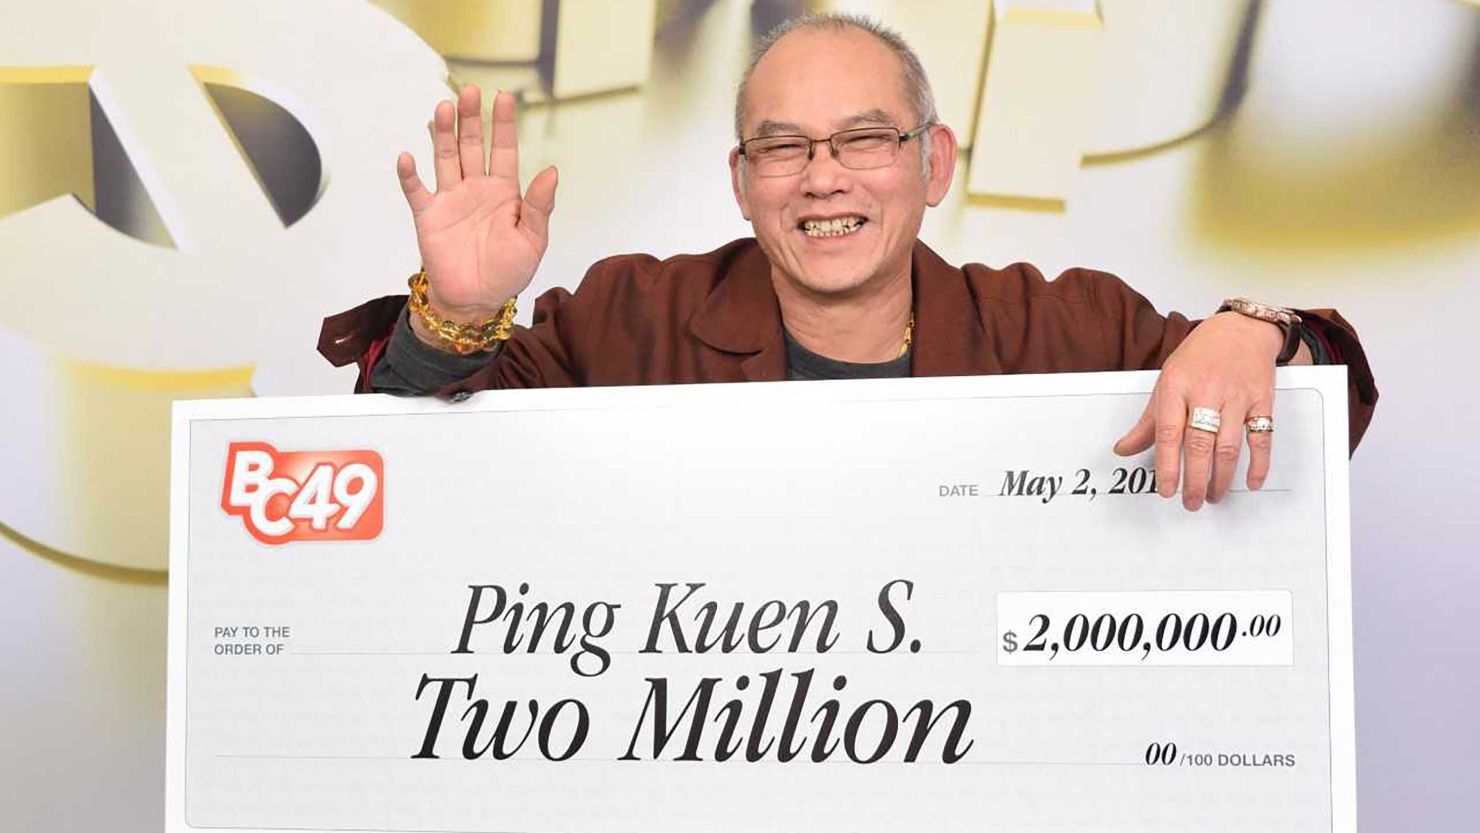 Ping Kuen Shum, had a birthday, retired and became a millionaire on the same day. 